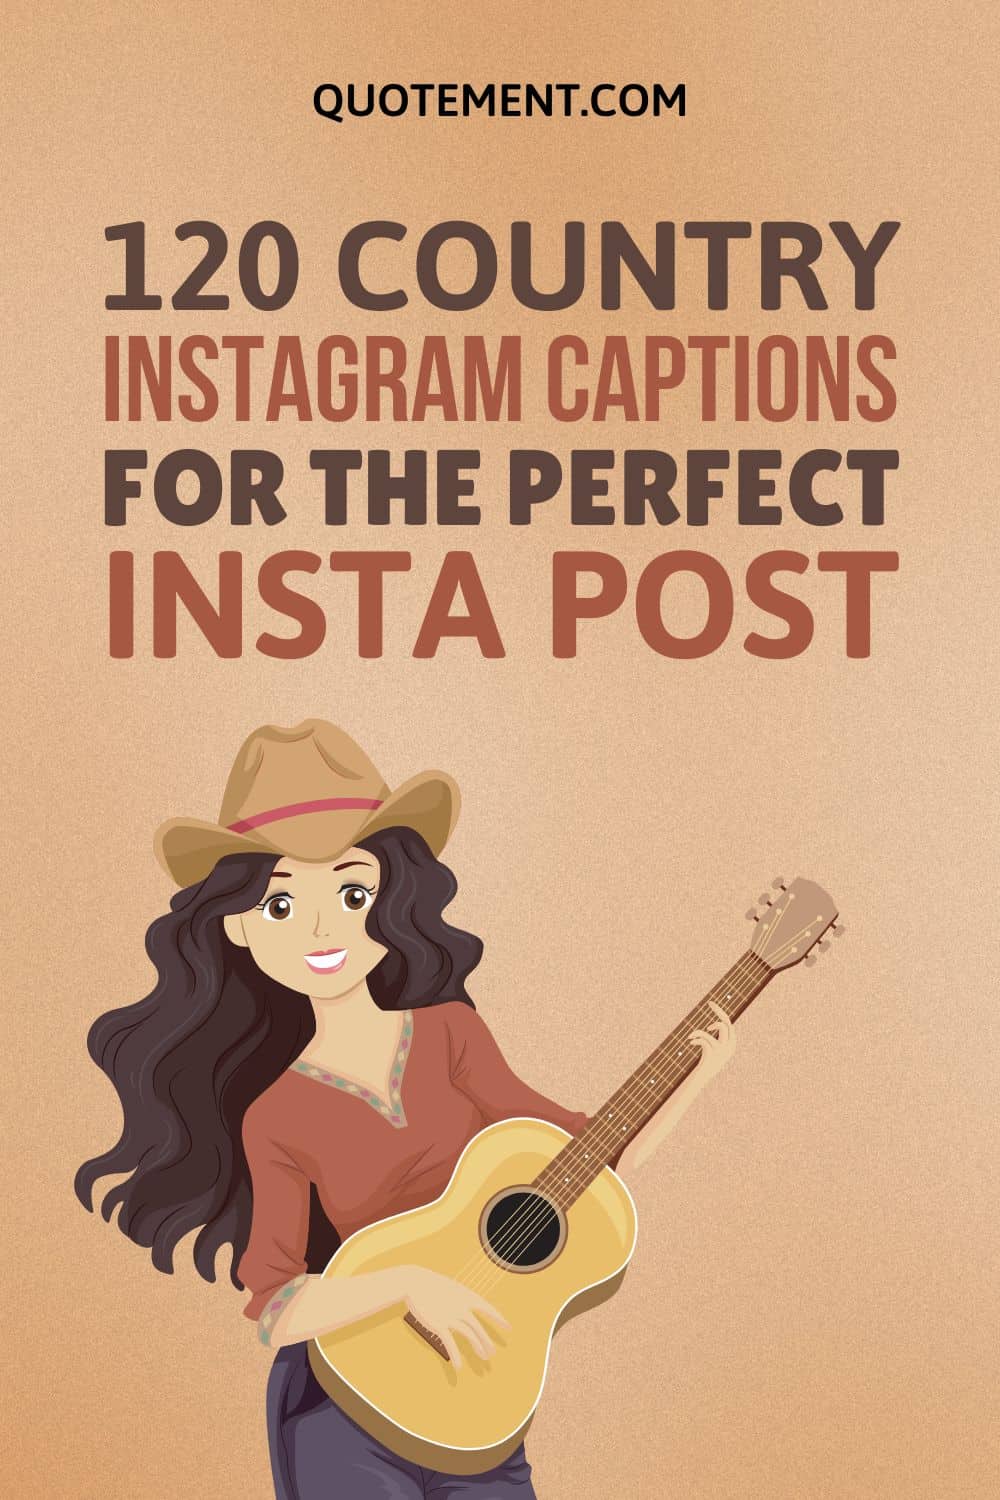 120 Country Instagram Captions For The Perfect Insta Post